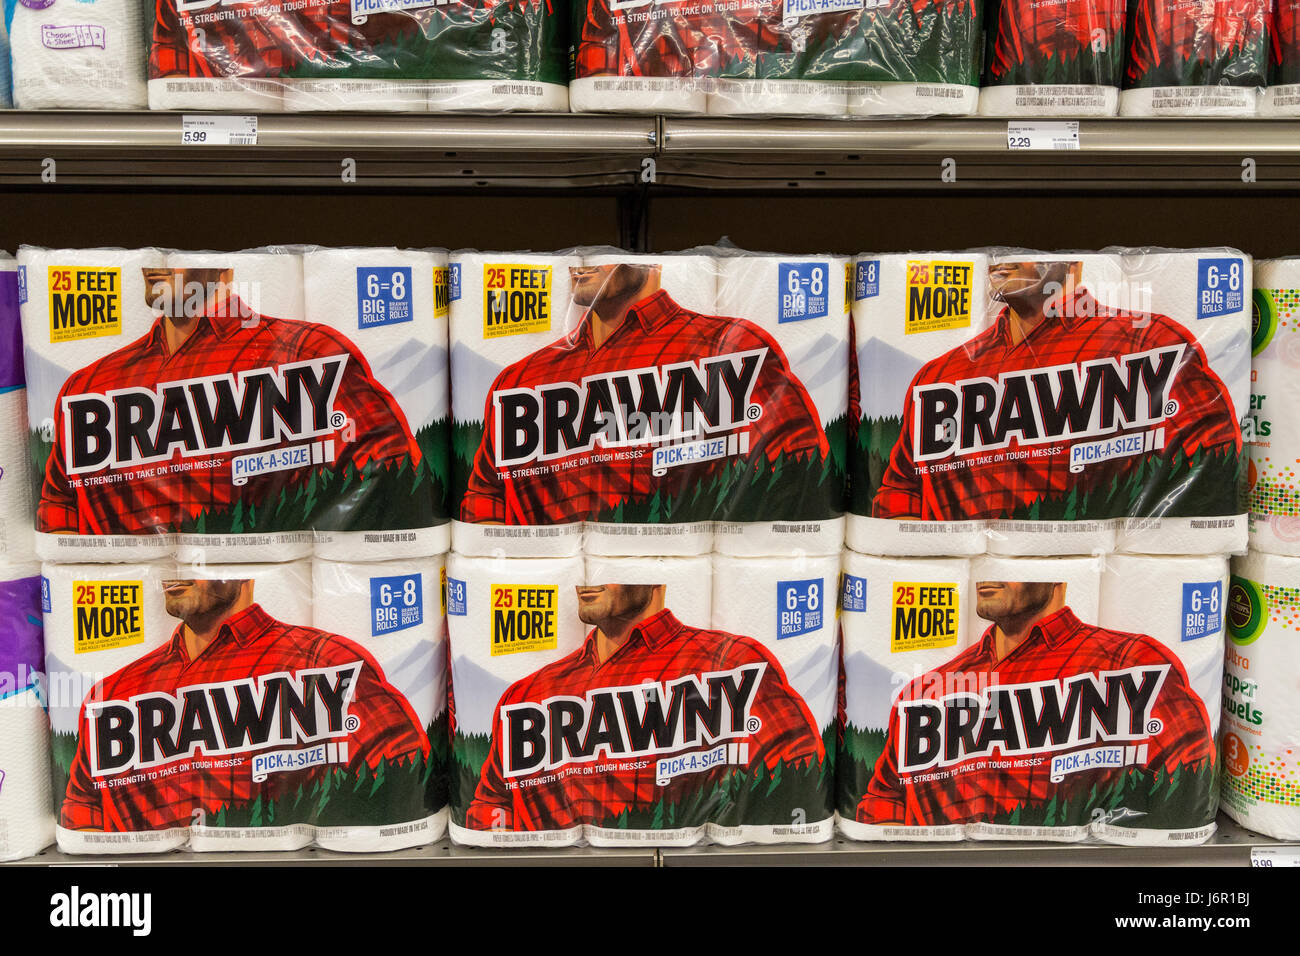 packages of Brawny brand paper towels stacked on grocery store shelves Stock Photo